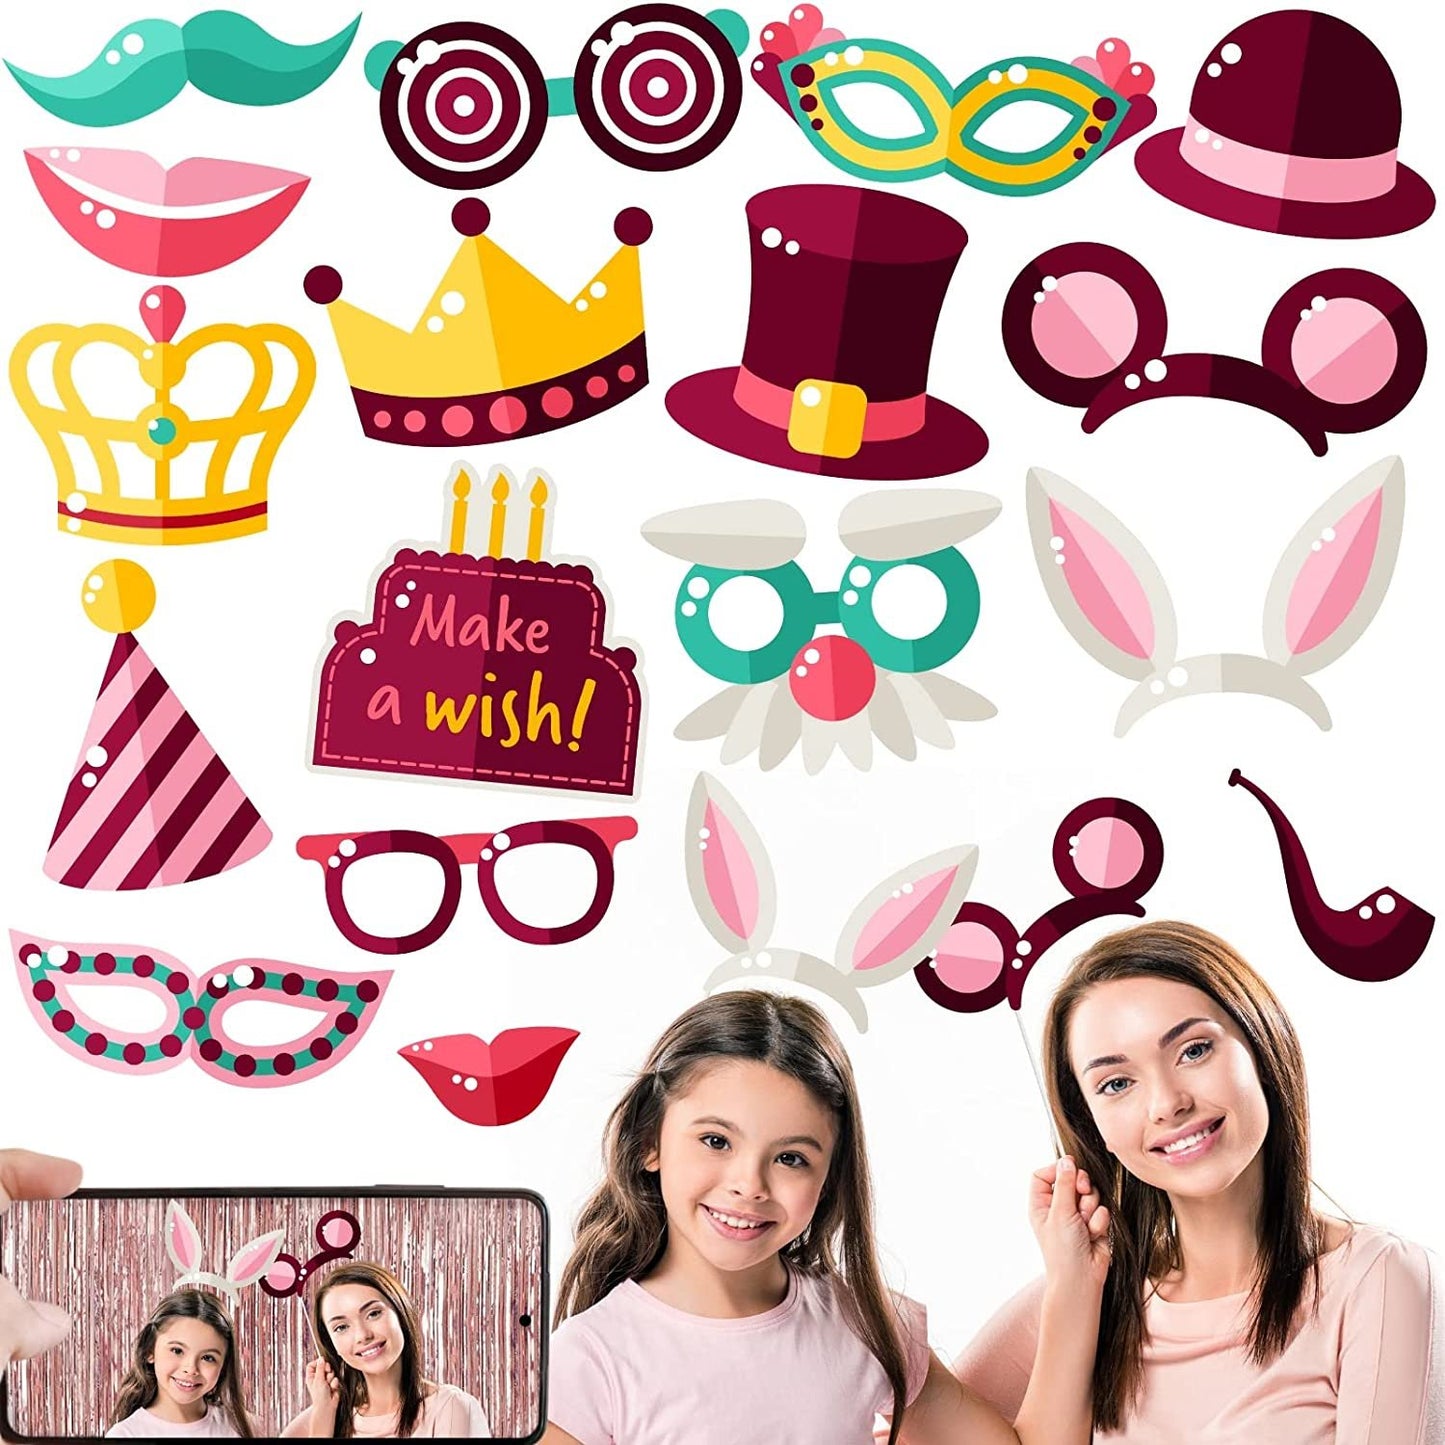 Birthday Photo Booth Props - Birthday Party Photobooth Props and Signs (17 Count) - Large and Durable Happy Birthday Photo Booth Props - Cute & Funny Birthday Photobooth Props